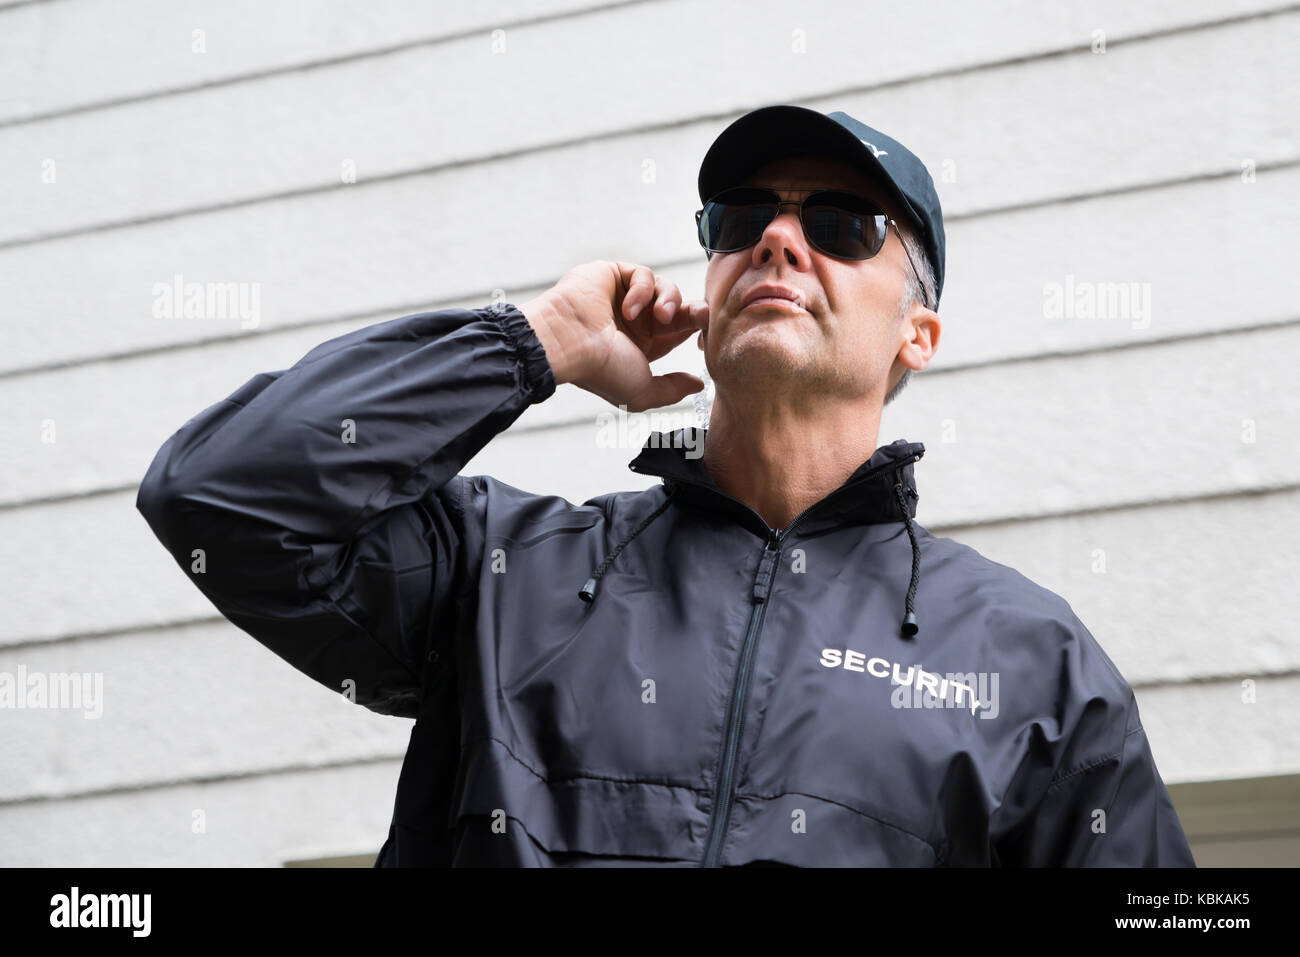 Confident mature security guard listening to earpiece against building Stock Photo